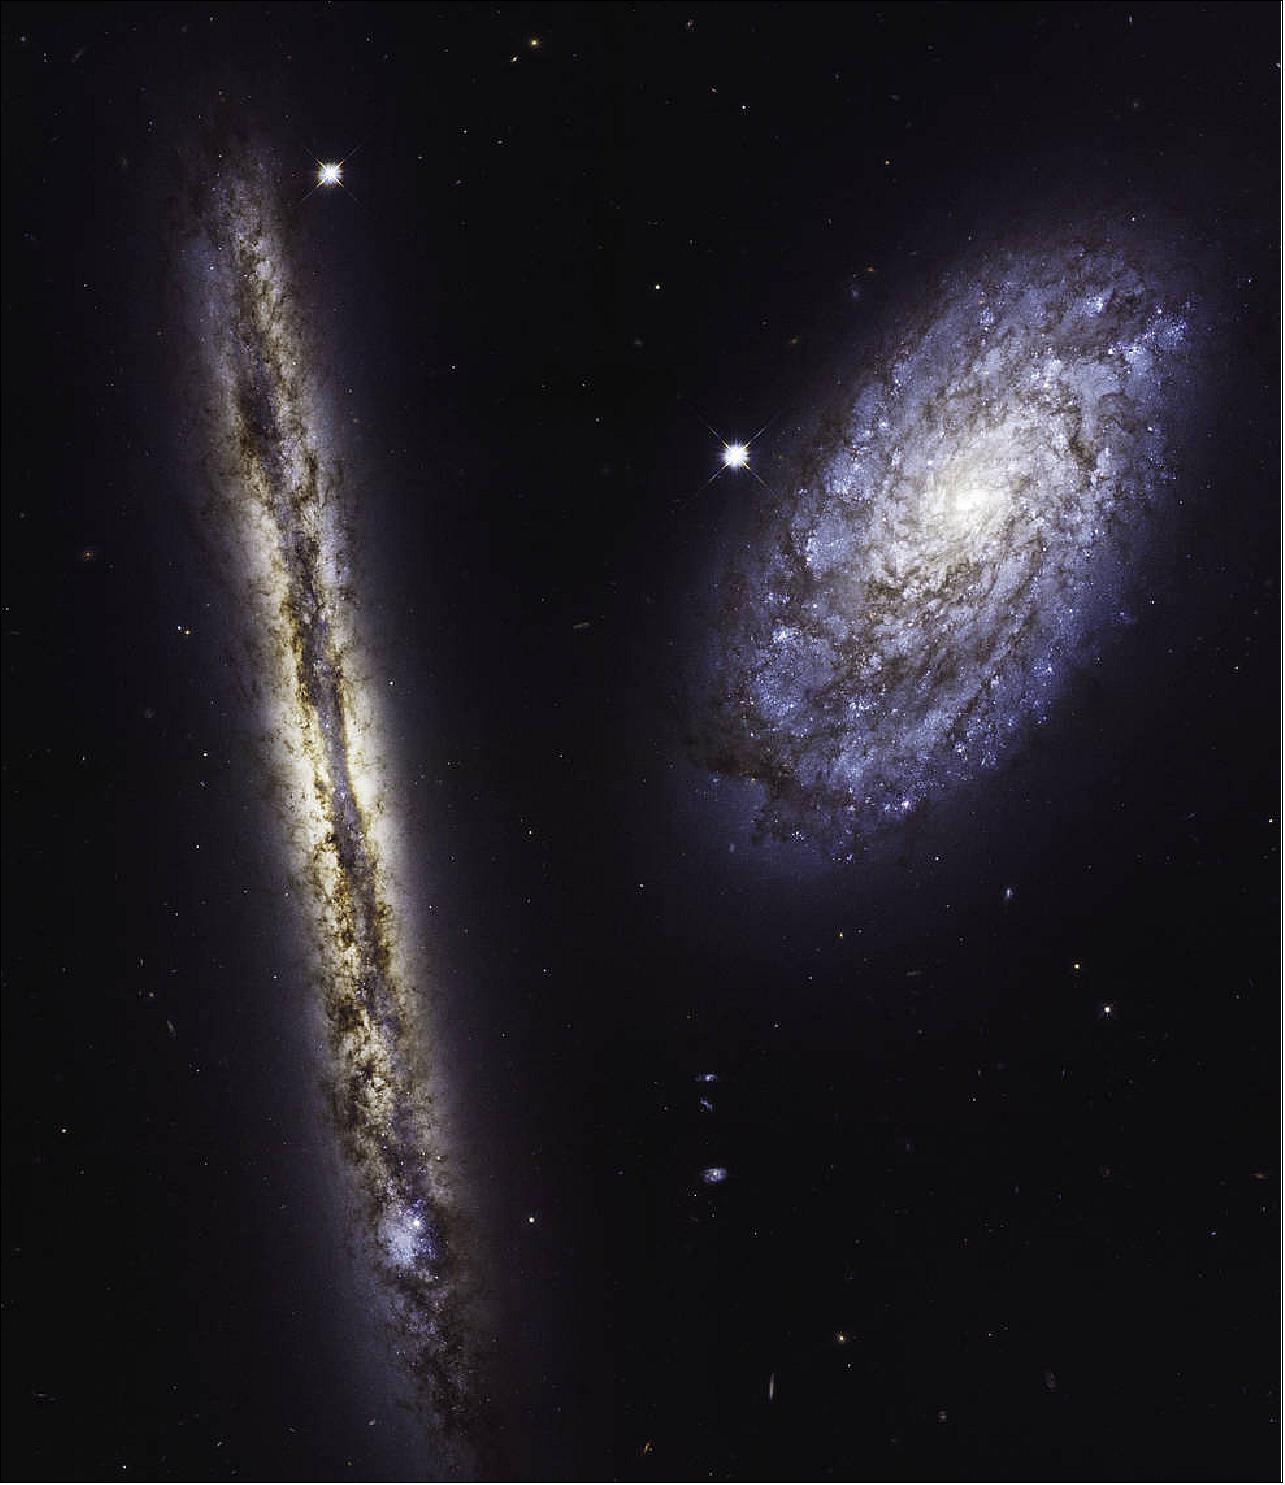 Figure 45: HST images of spiral galaxies NGC 4302 (left) and NGC 4298 (right), both located 55 million light-years away. They were observed by Hubble to celebrate its 27th year in orbit. The image in visible and infrared light brilliantly captures their warm stellar glow and brown, mottled patterns of dust [image credit: NASA, ESA, and M. Mutchler (STScI)]